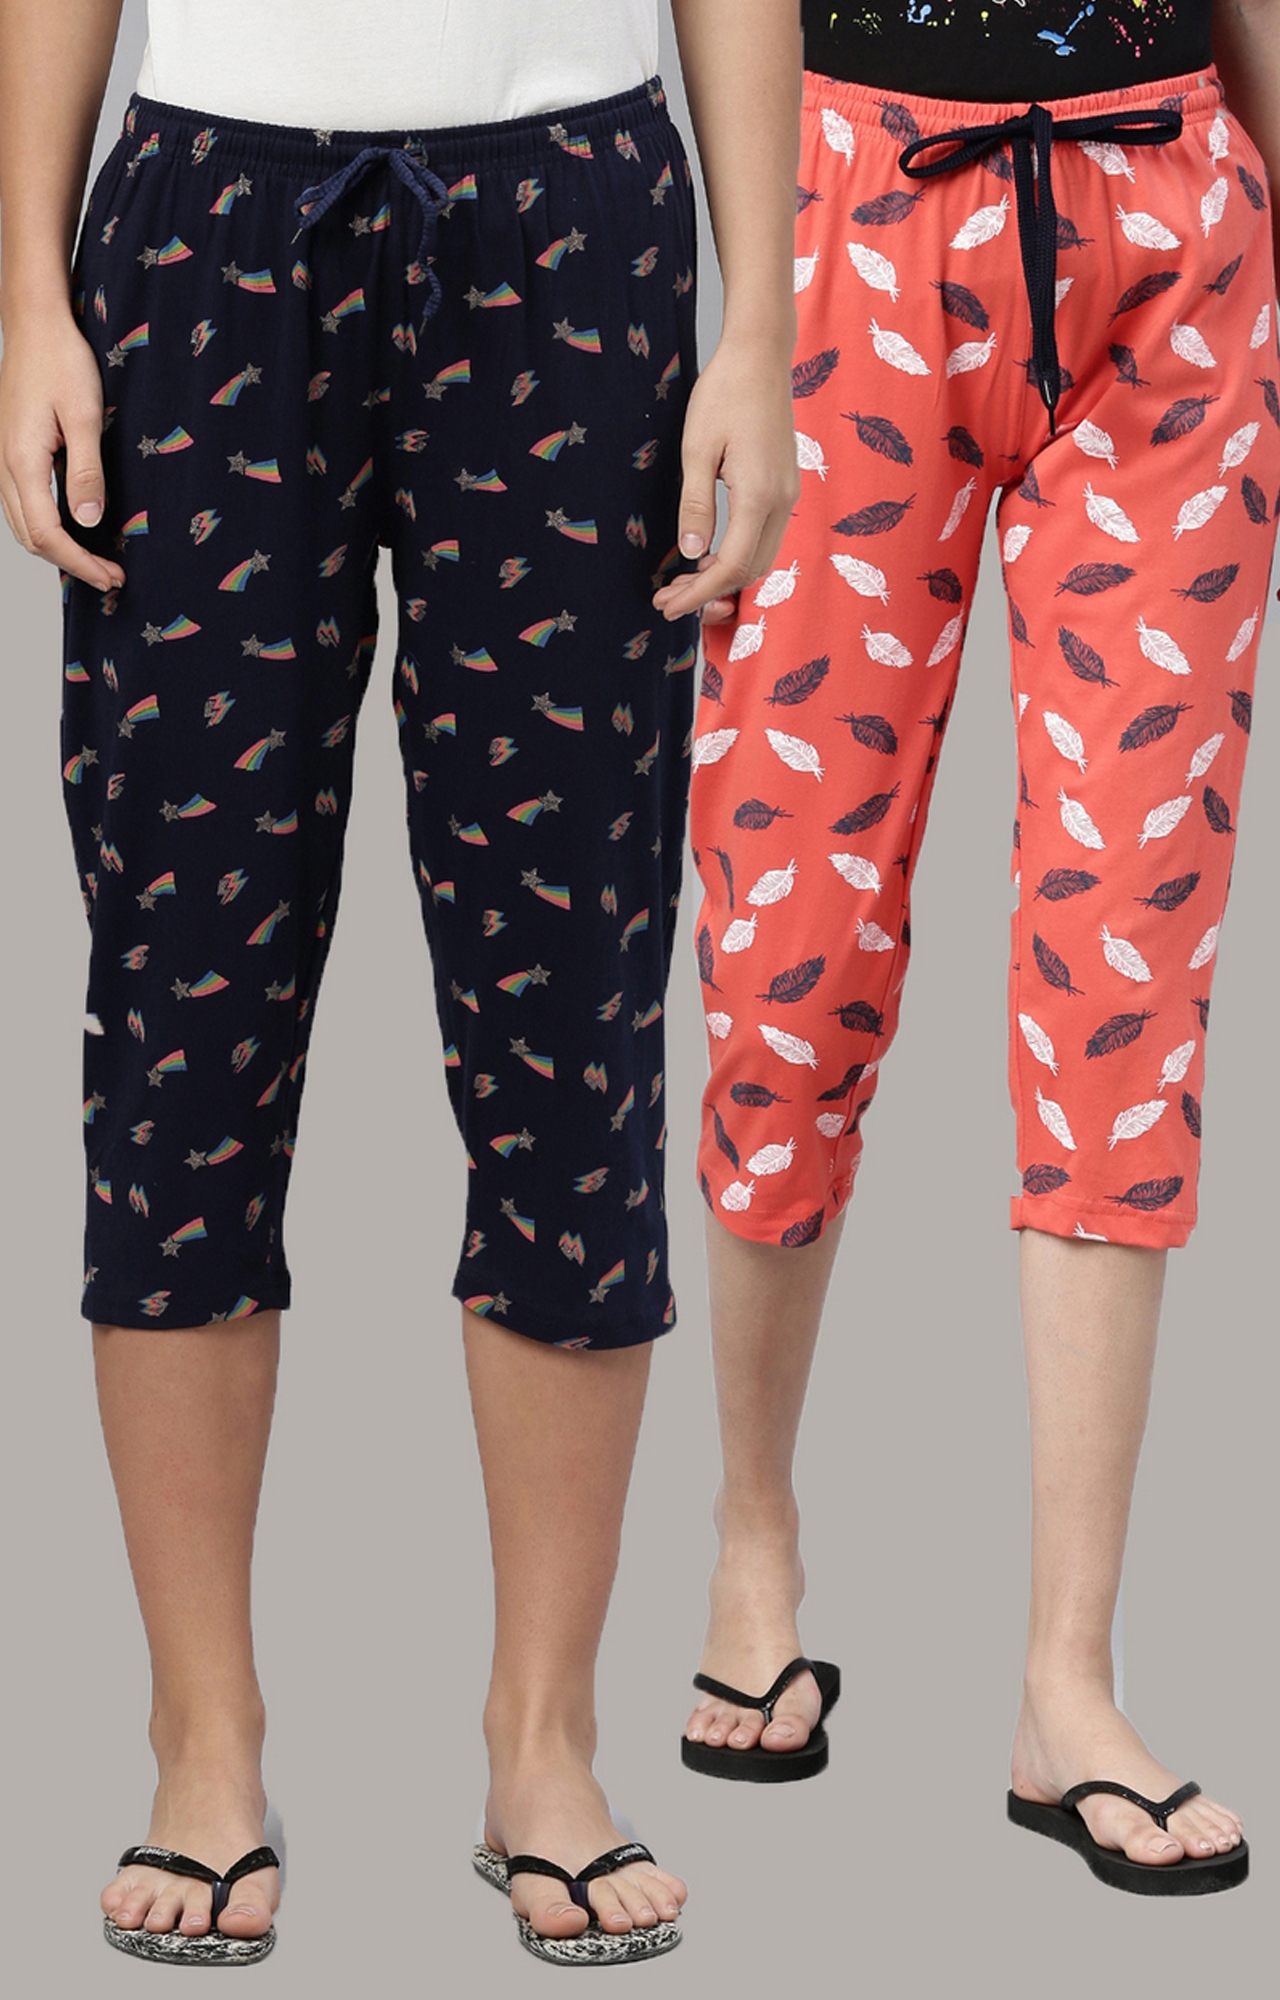 Kryptic Women's 100% Cotton Printed Capris (Pack of 2)